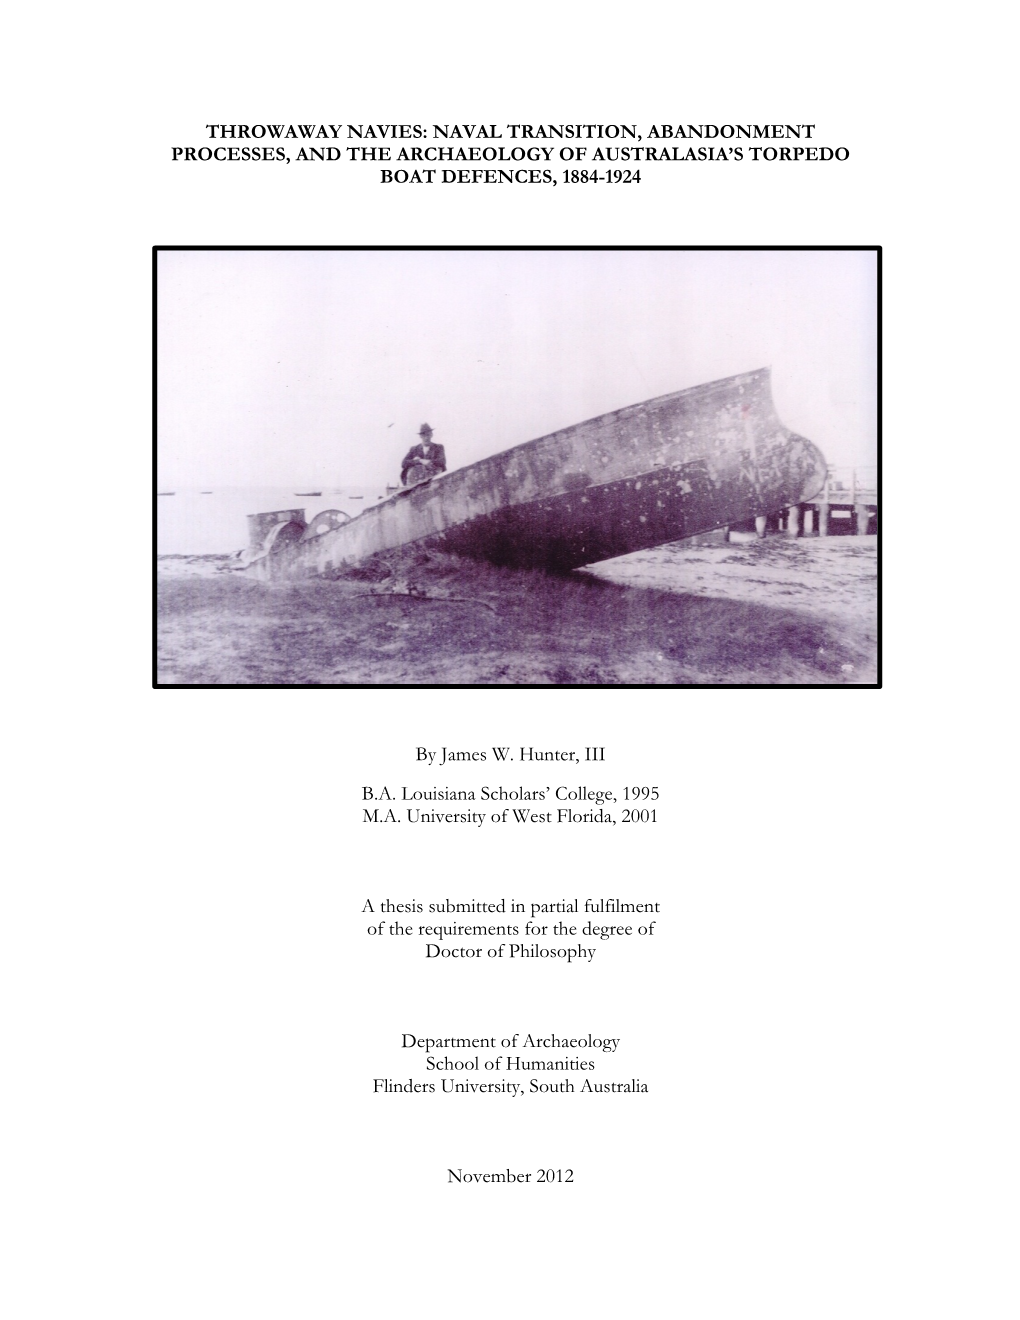 Throwaway Navies: Naval Transition, Abandonment Processes, and the Archaeology of Australasia’S Torpedo Boat Defences, 1884-1924